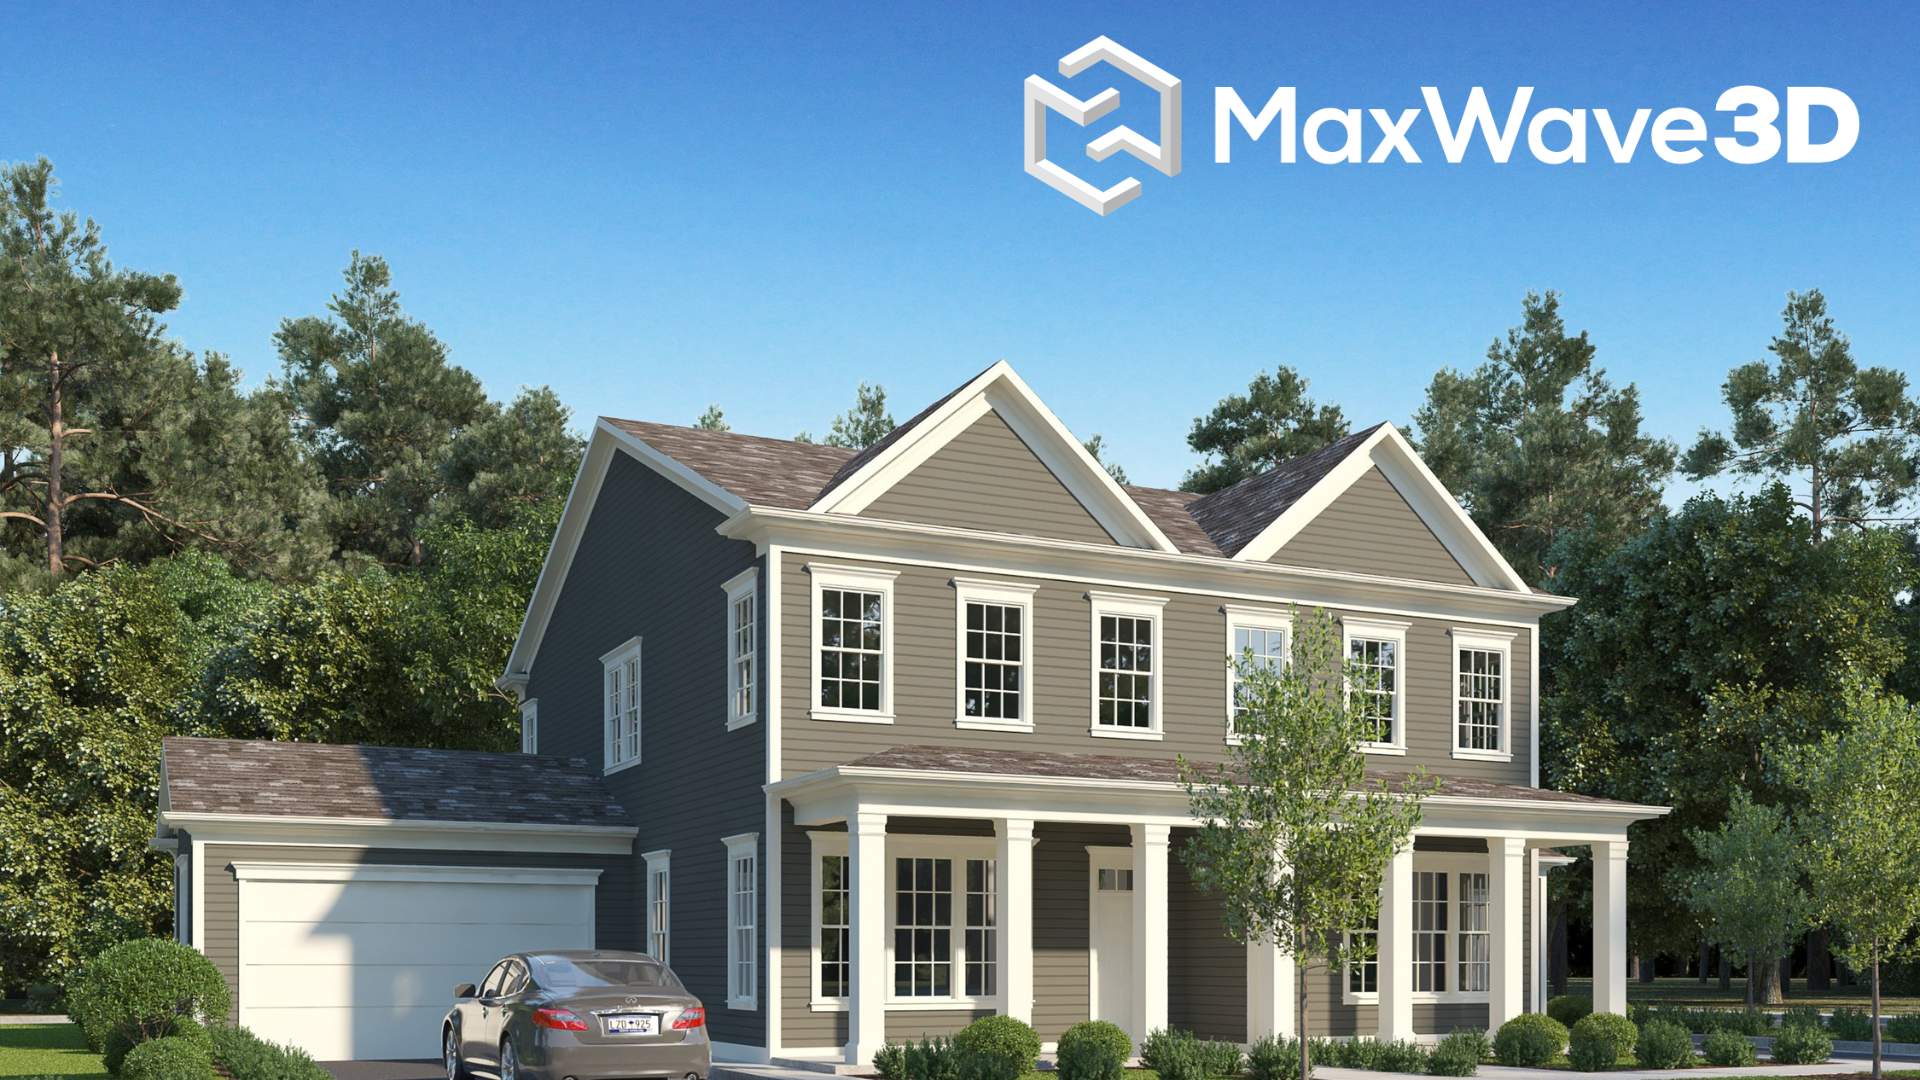 The 4 Ps of Real Estate Marketing - MaxWave3D